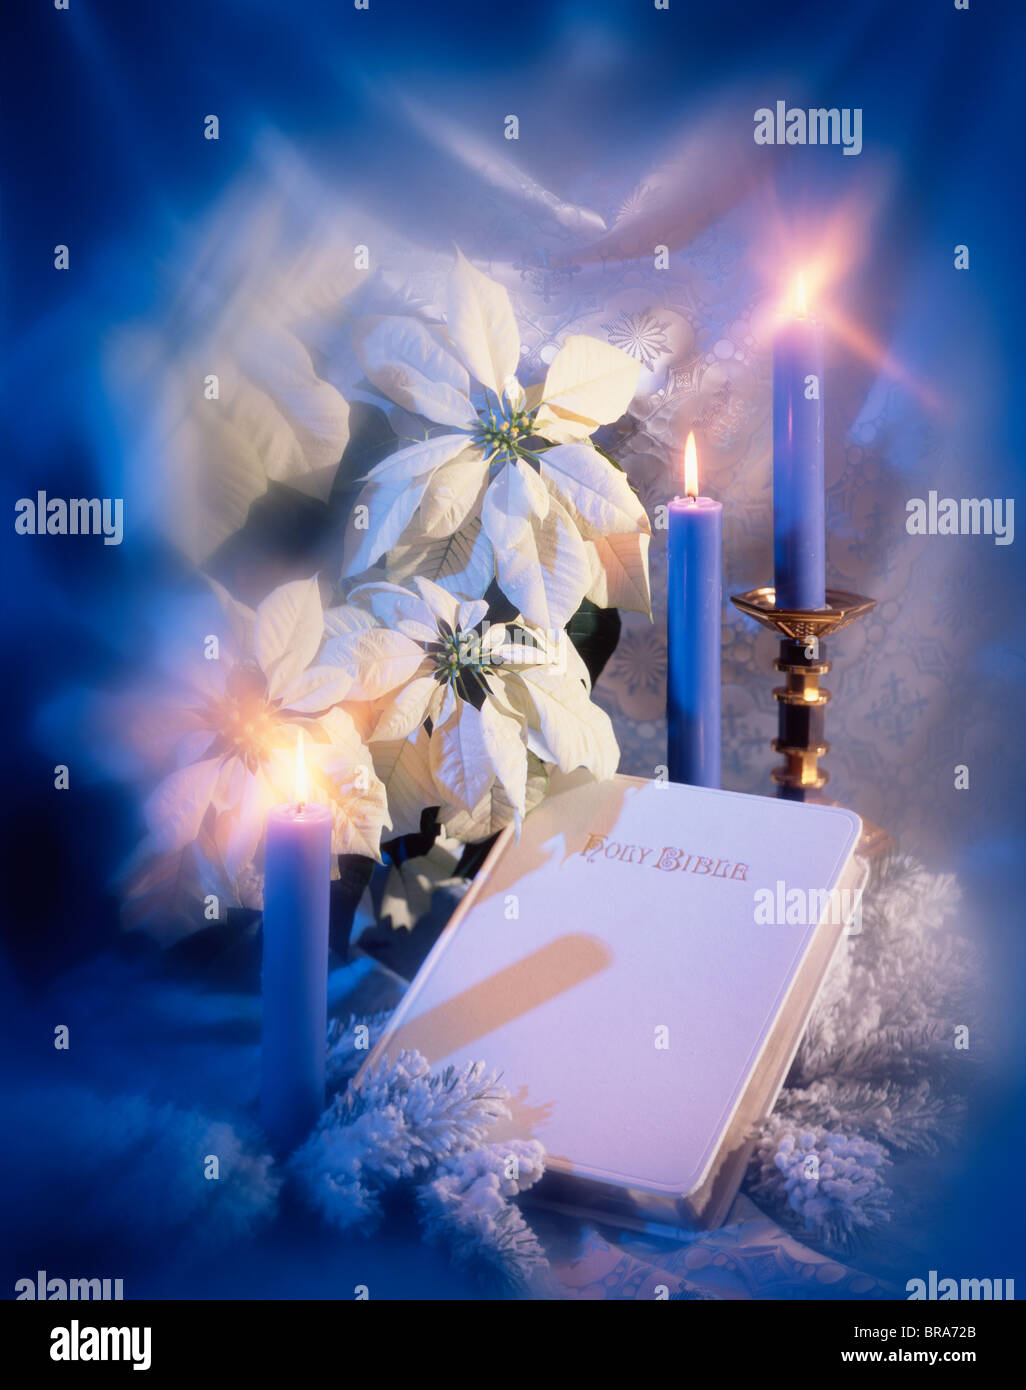 WHITE BIBLE WHITE POINSETTIAS BLUE CANDLES WHITE LACE BACKGROUND SNOW COVERED EVERGREEN BRANCHES Stock Photo